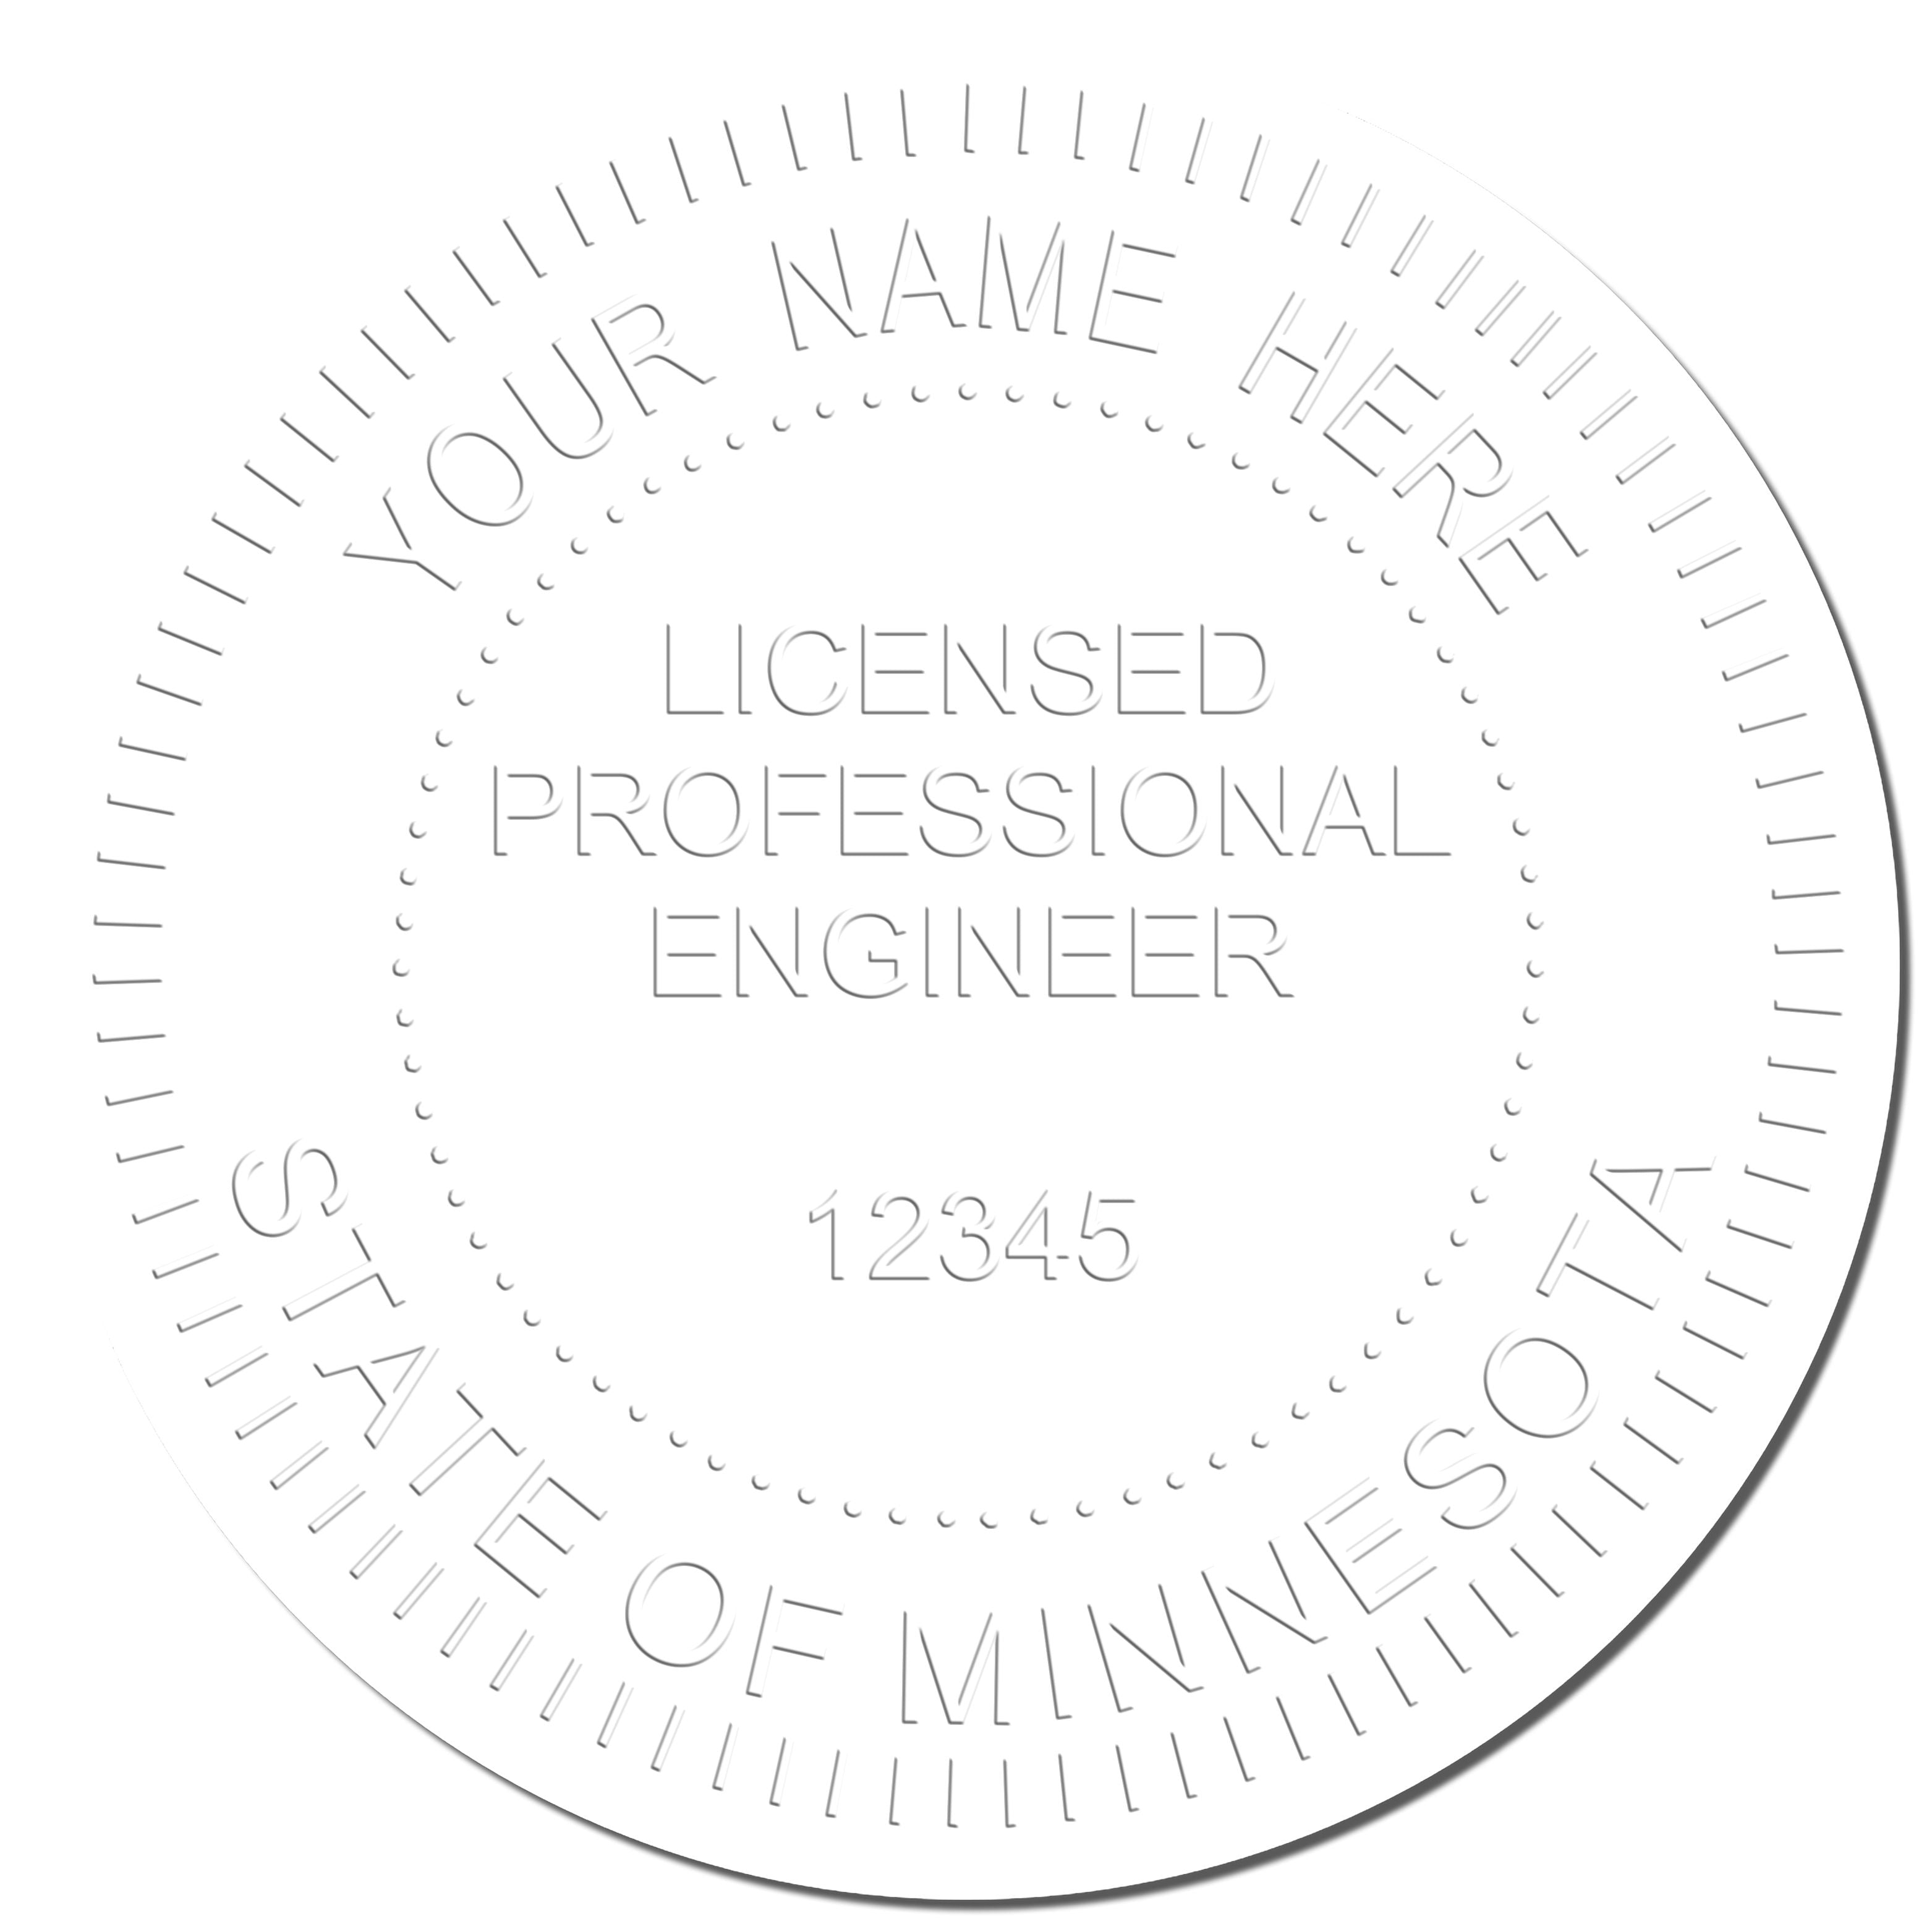 Another Example of a stamped impression of the Minnesota Engineer Desk Seal on a piece of office paper.